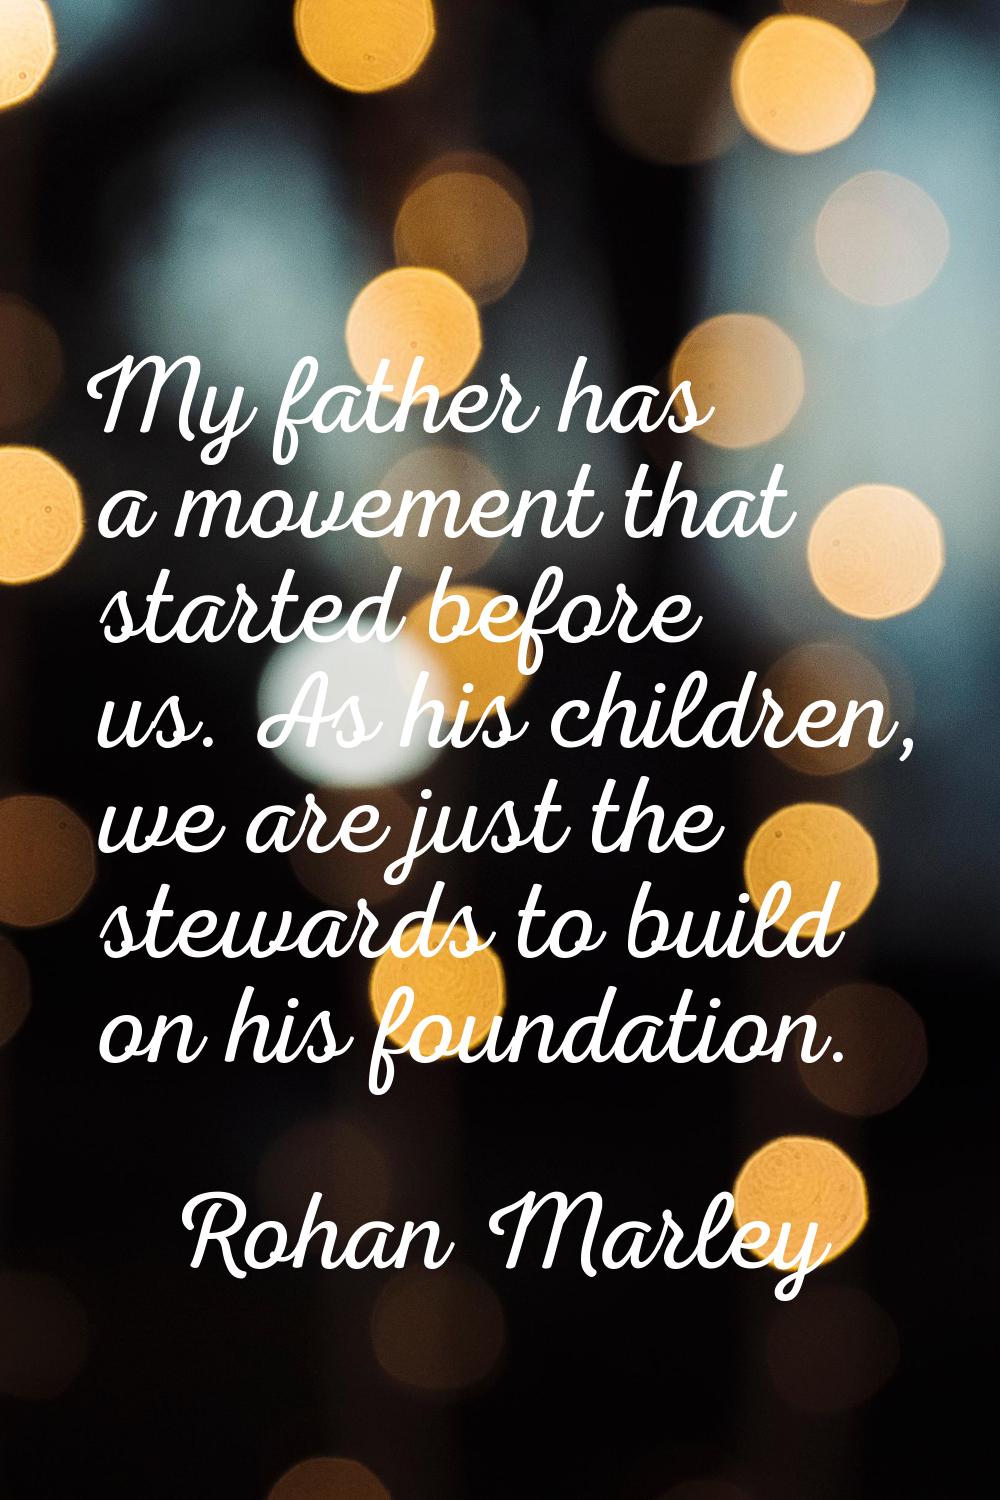 My father has a movement that started before us. As his children, we are just the stewards to build